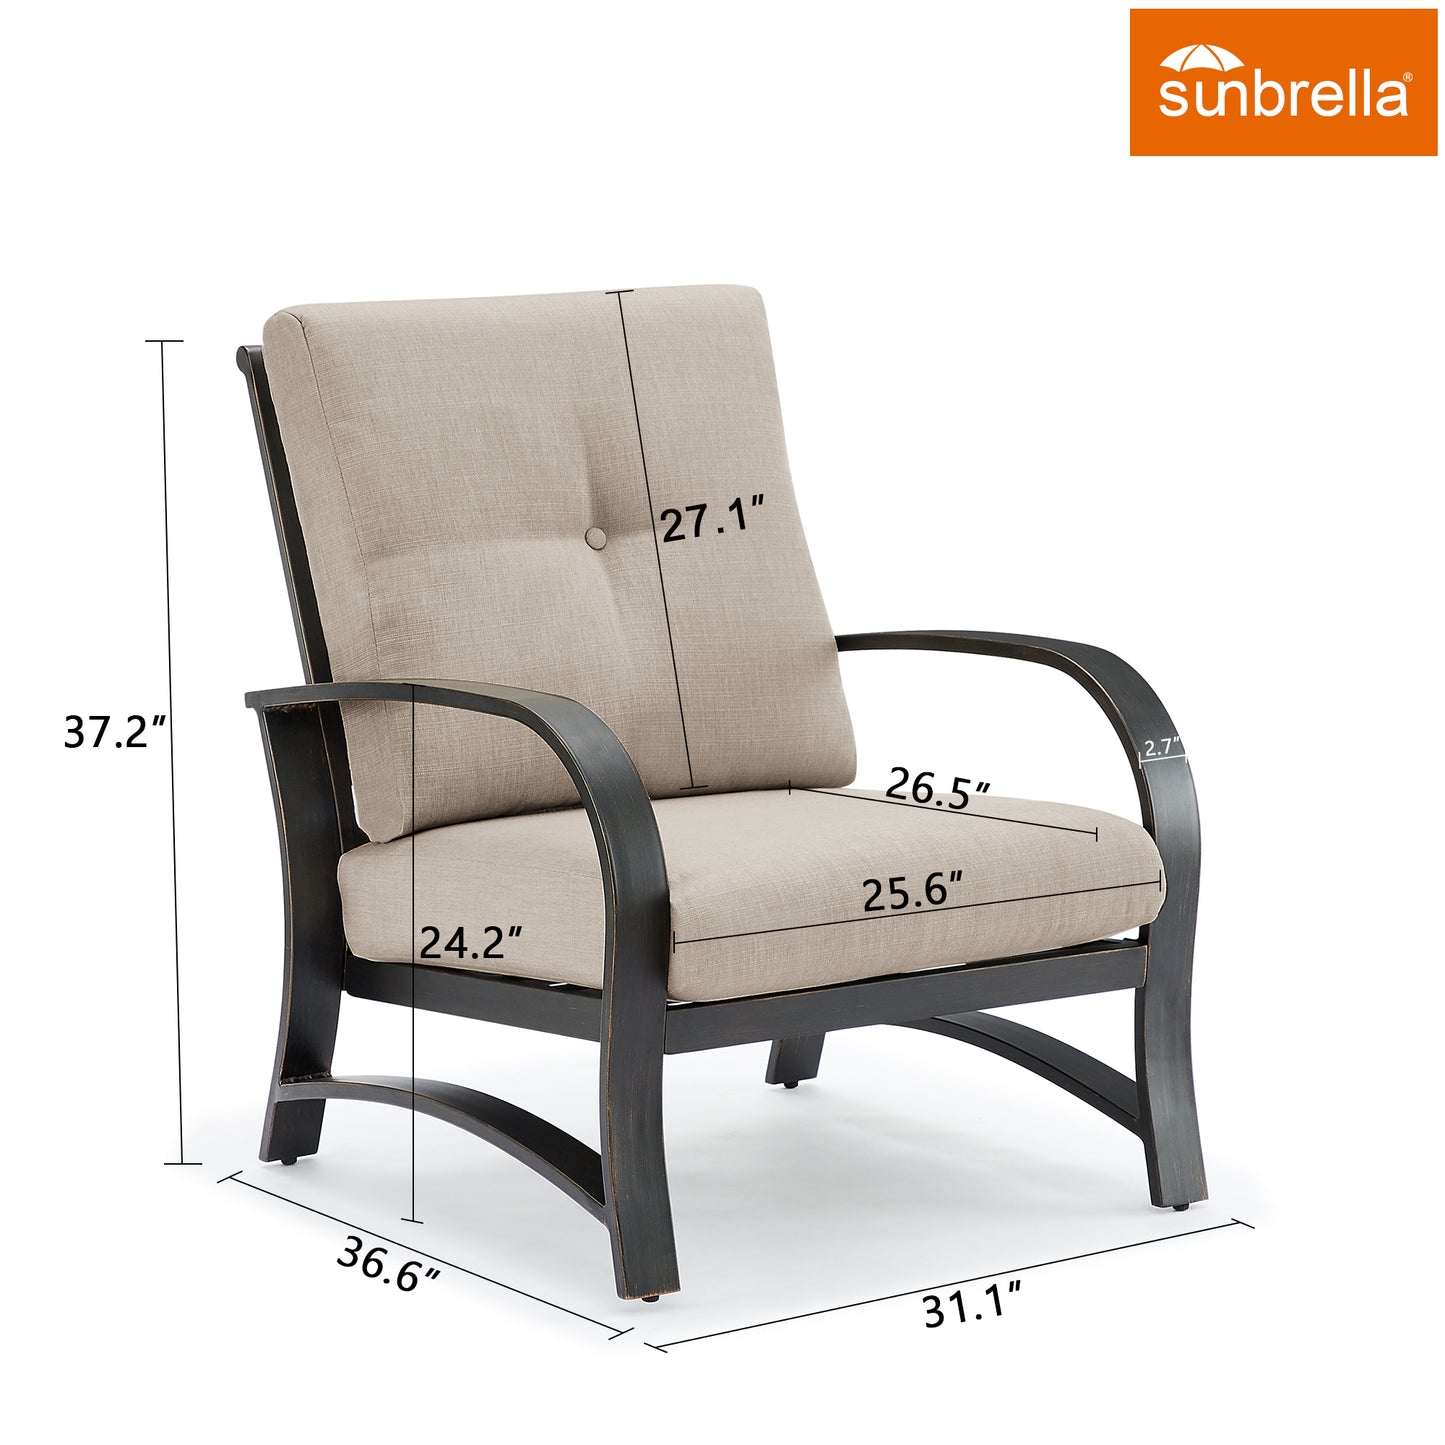 Patio All-Weather Aluminum Club Chair with Sunbrella Cushion Covers